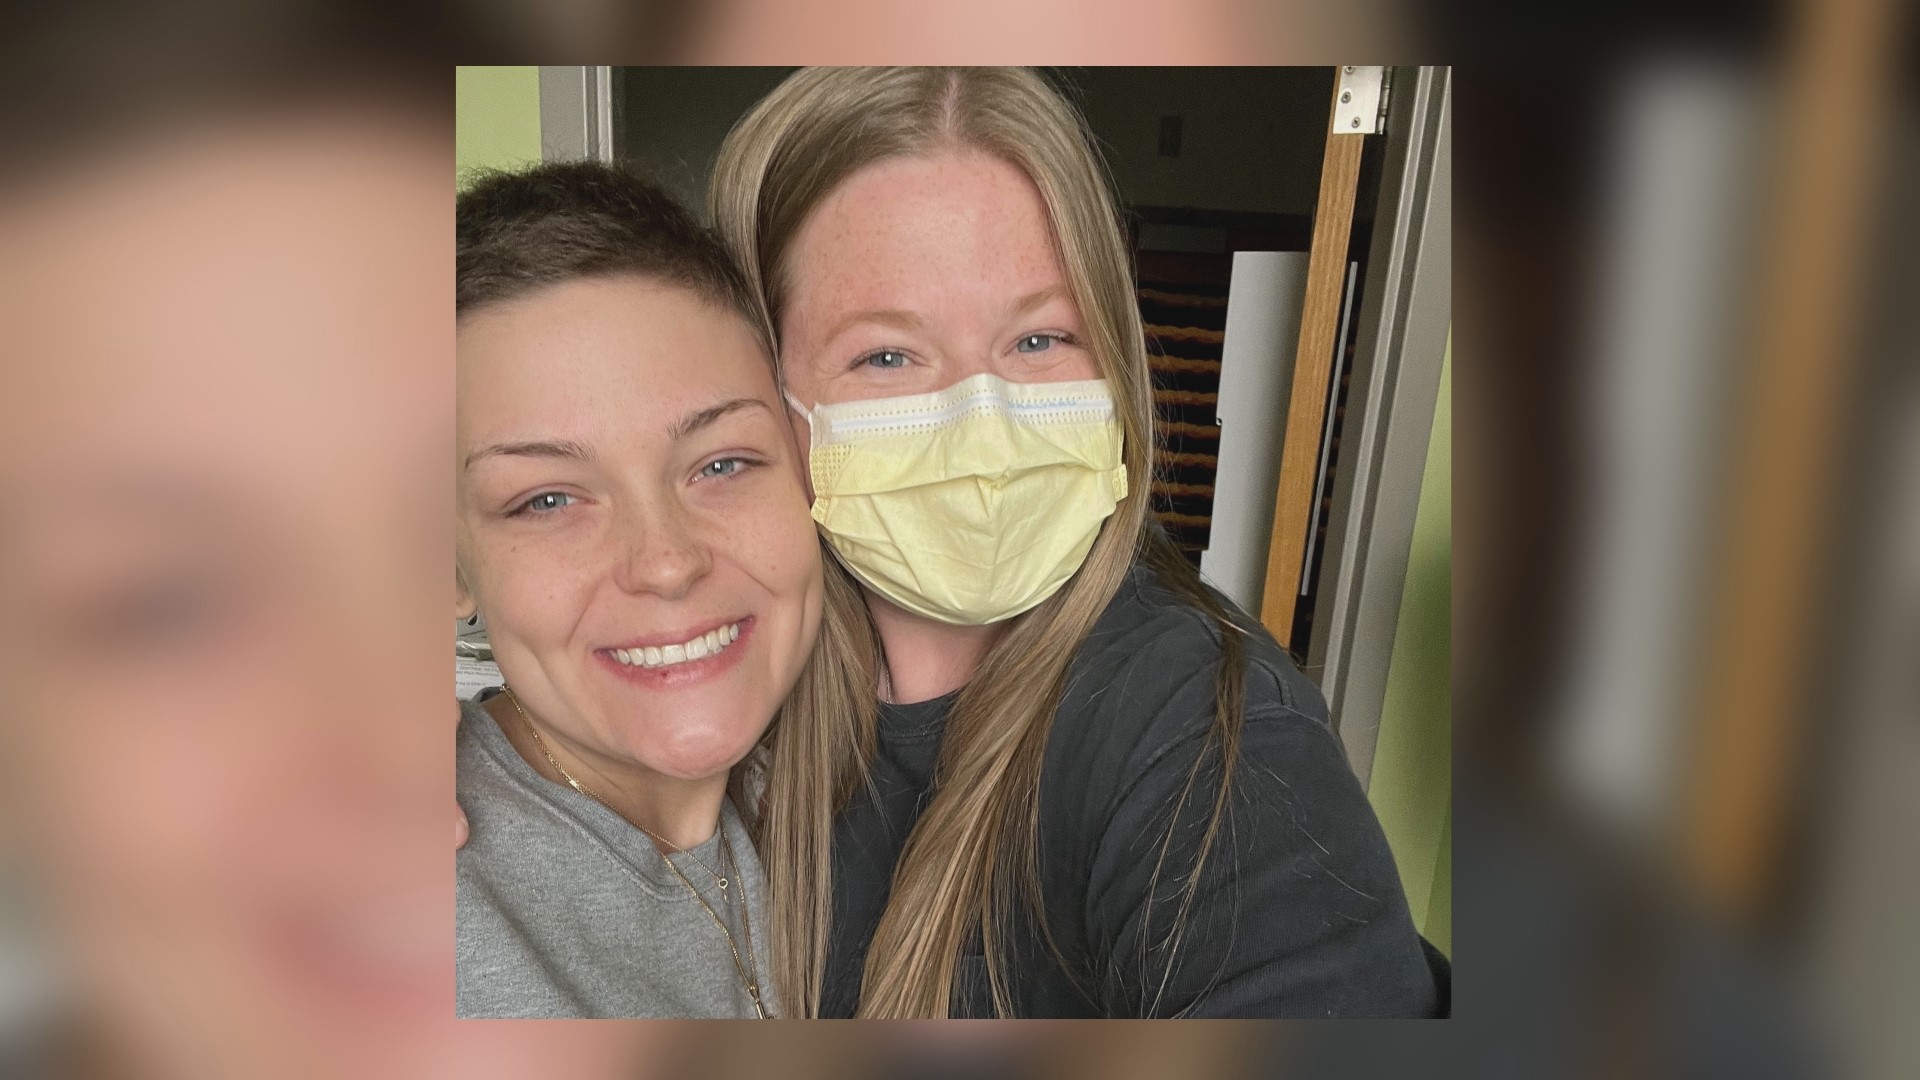 Phenix Cowart, 20, was diagnosed with acute myeloid leukemia in December 2020 and had to graduate early to begin treatment